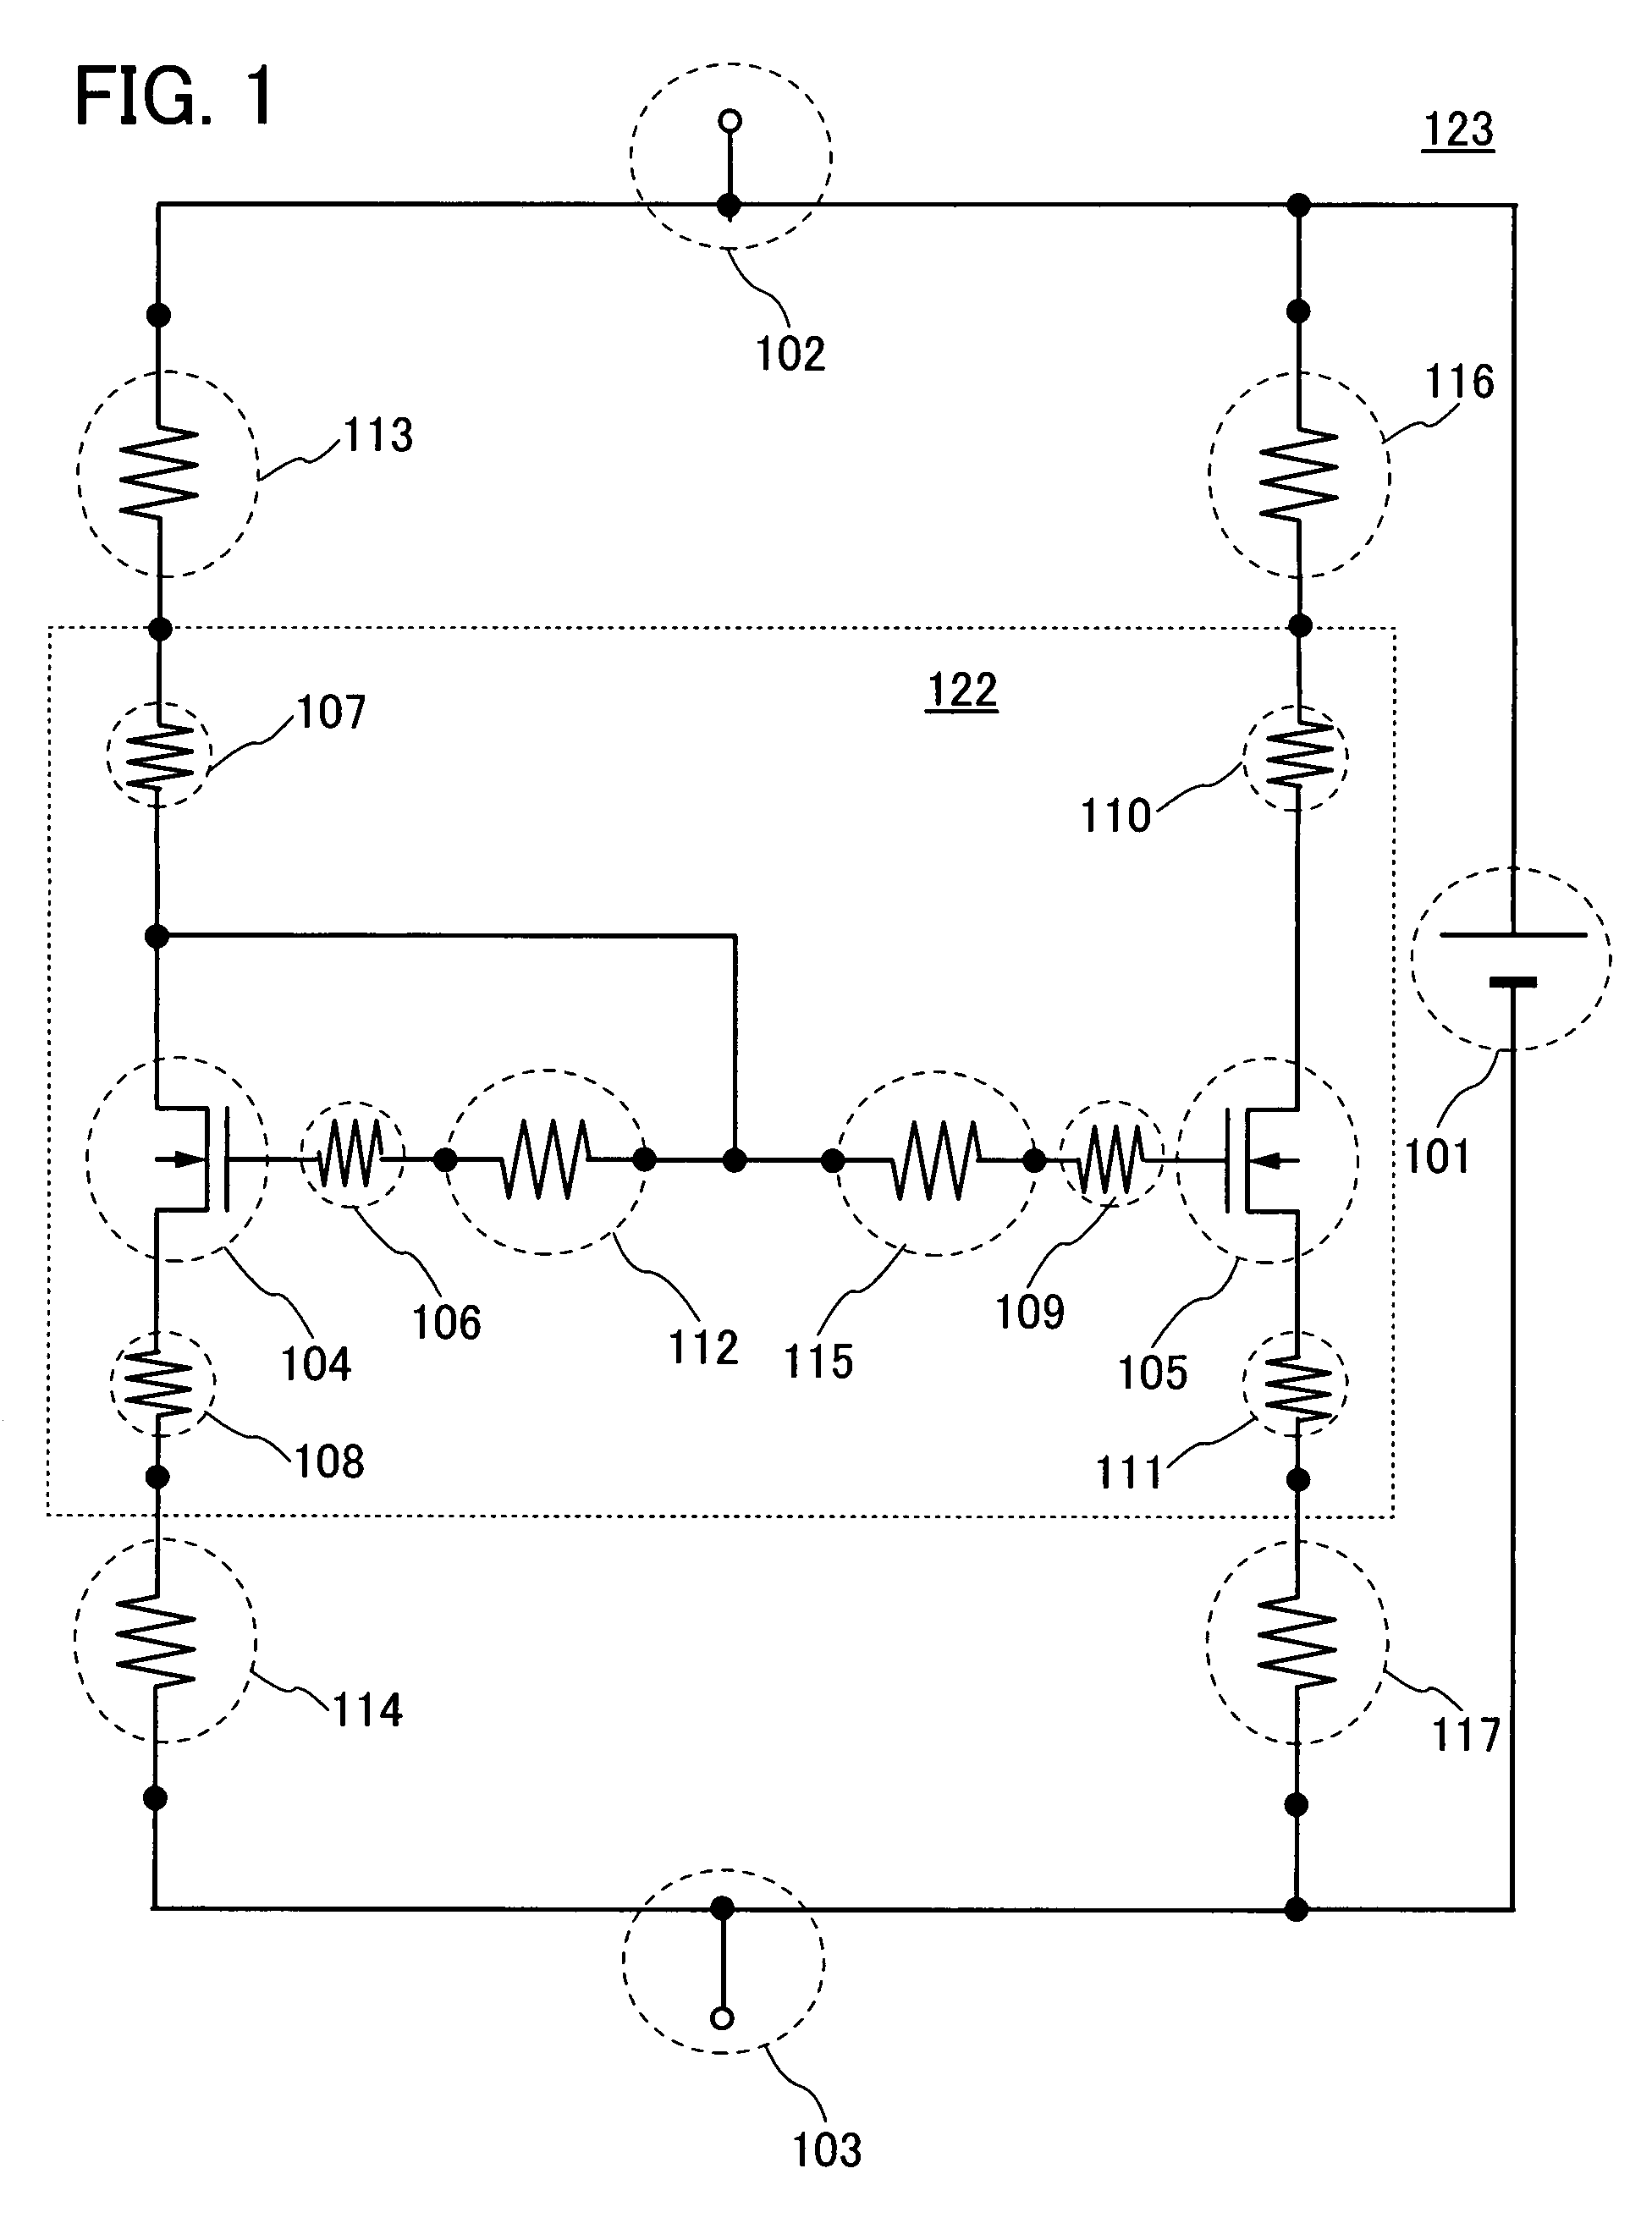 Semiconductor device including a current mirror circuit